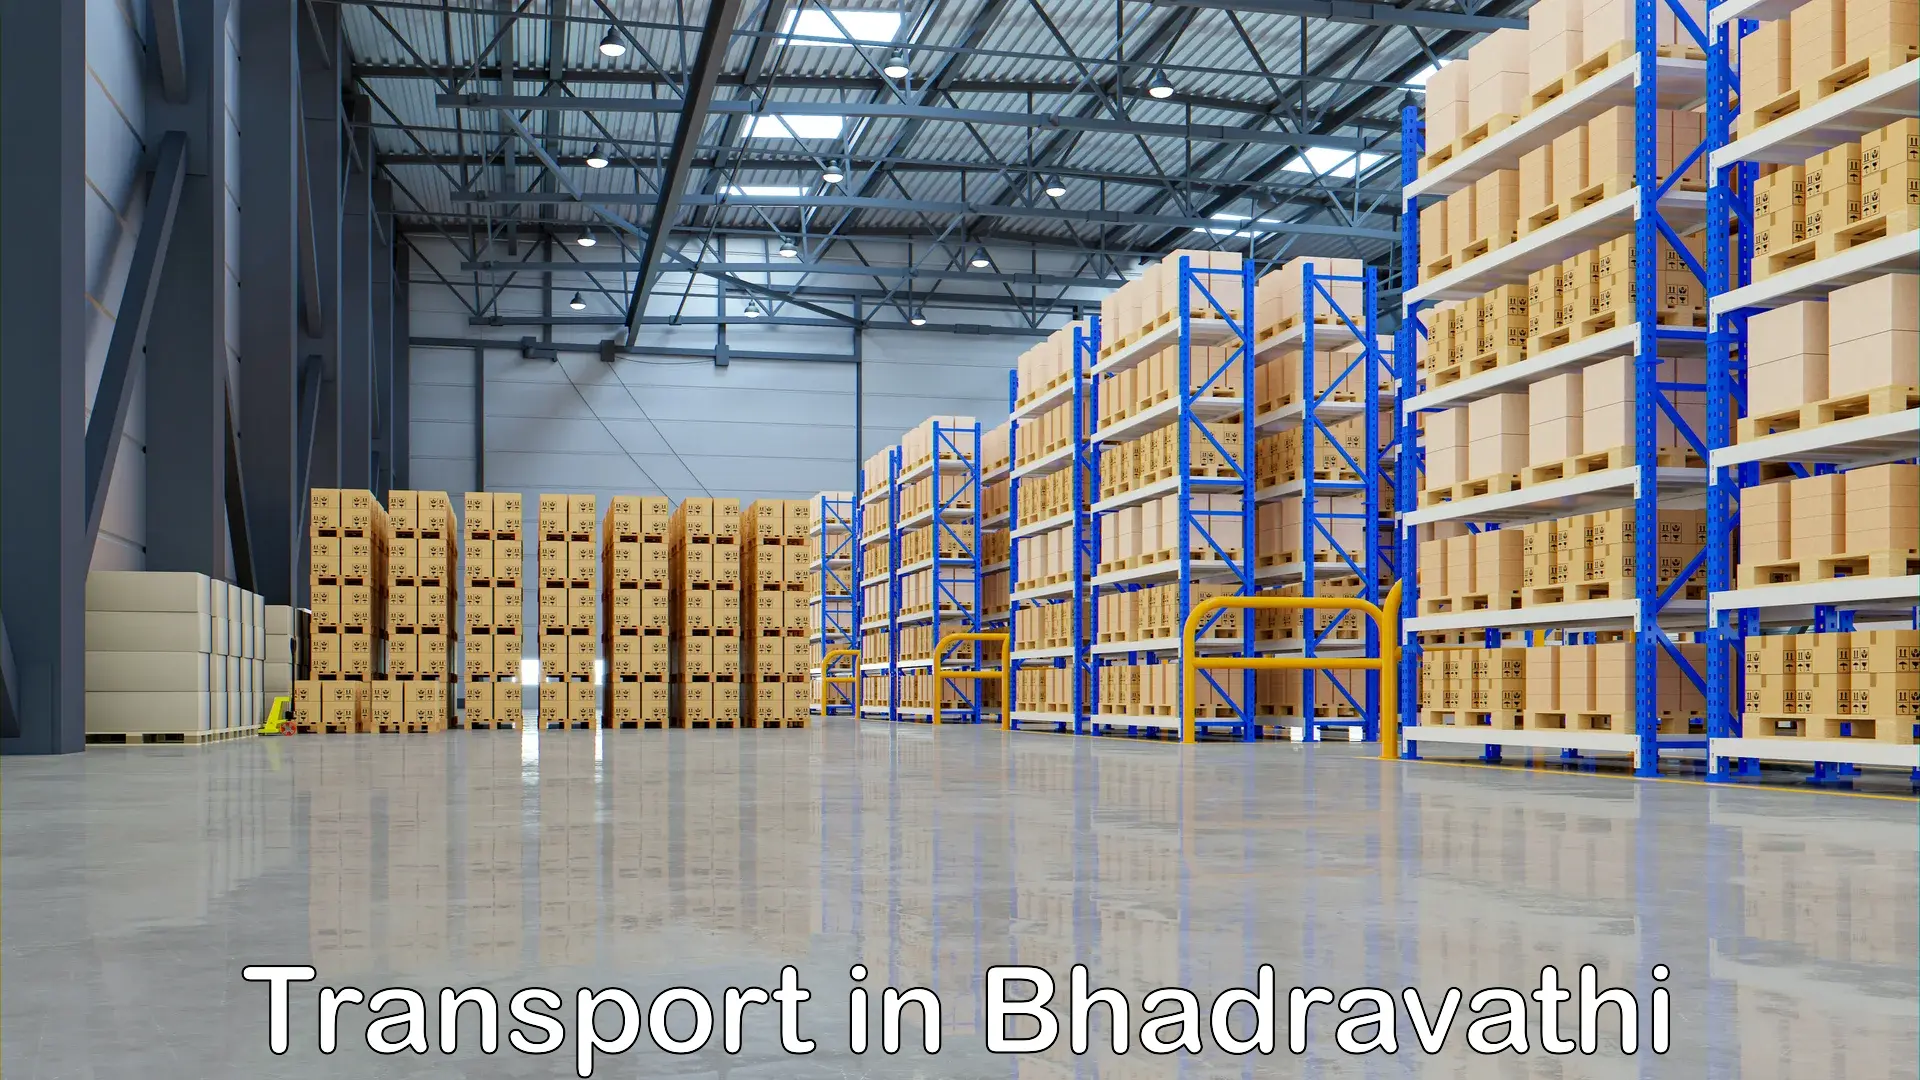 Daily parcel service transport in Bhadravathi